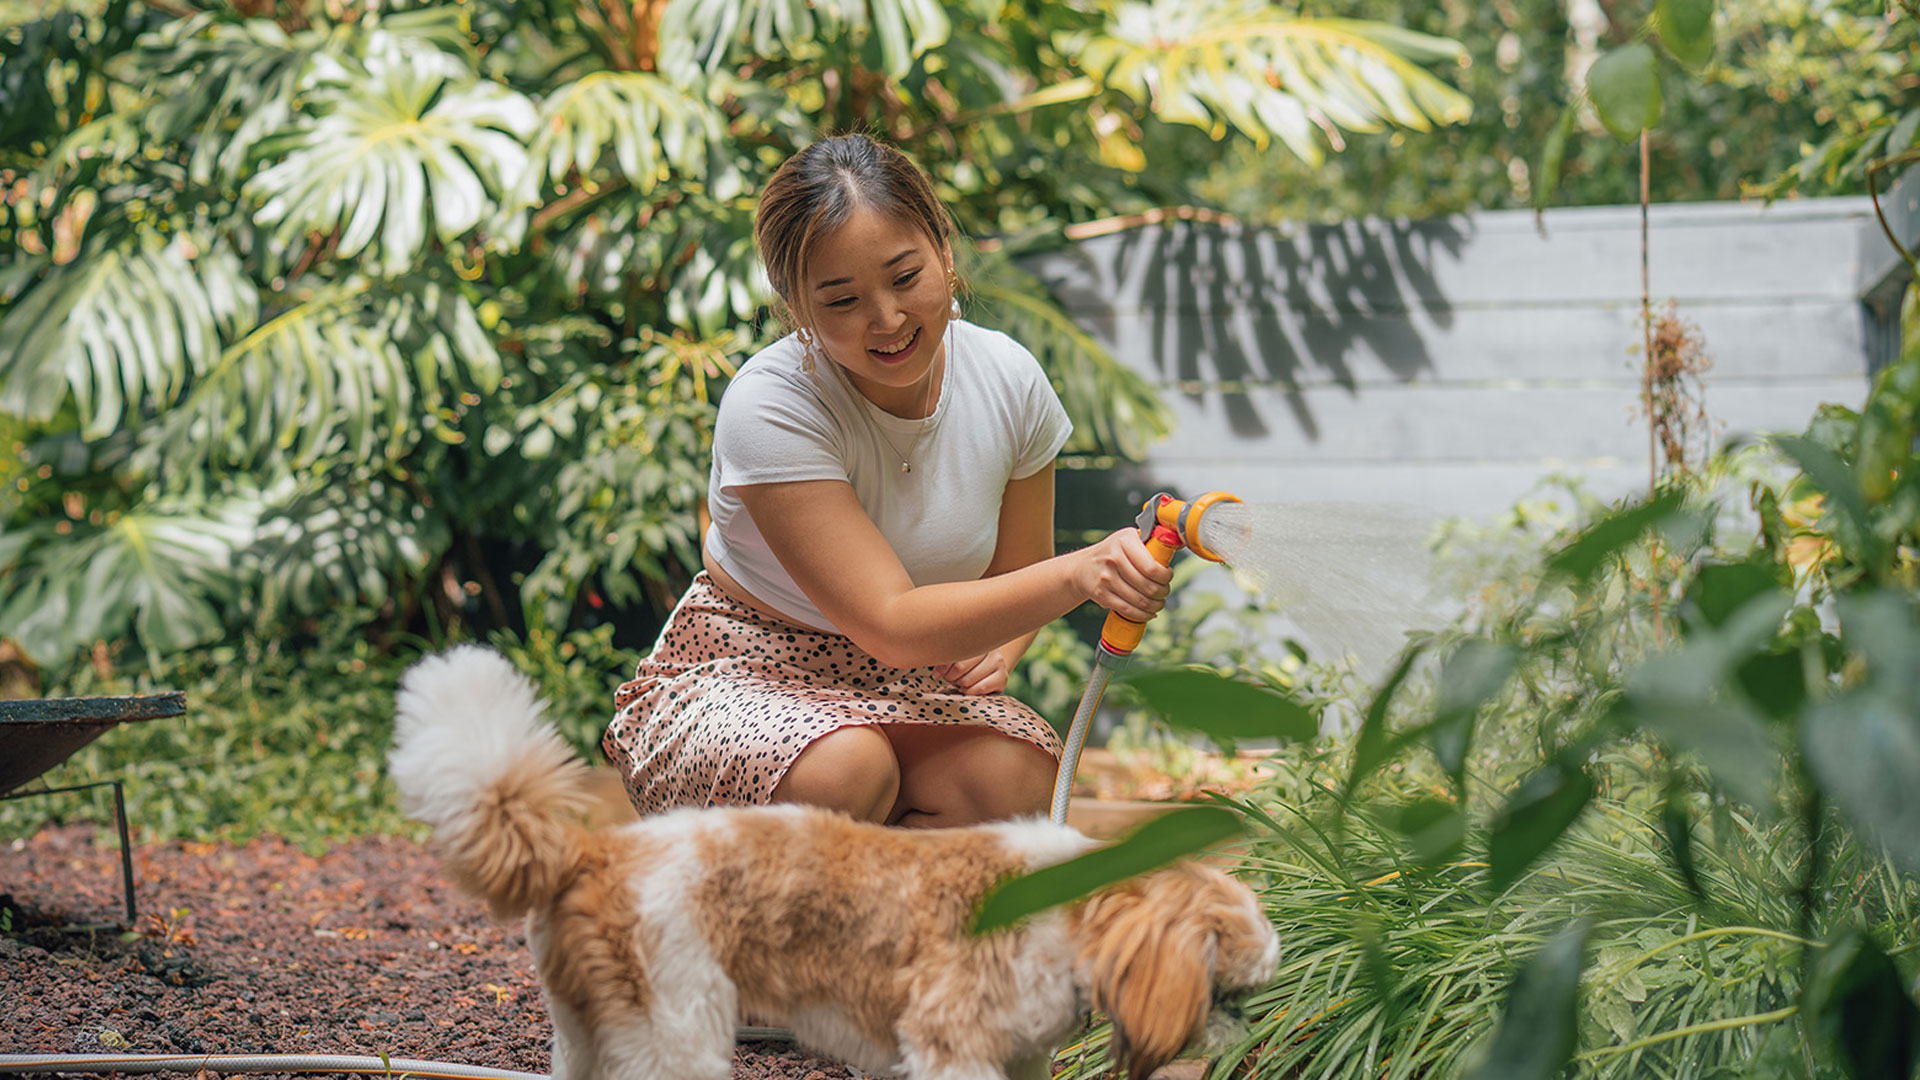 Woman watering her garden with a hose with her dog in the foreground.